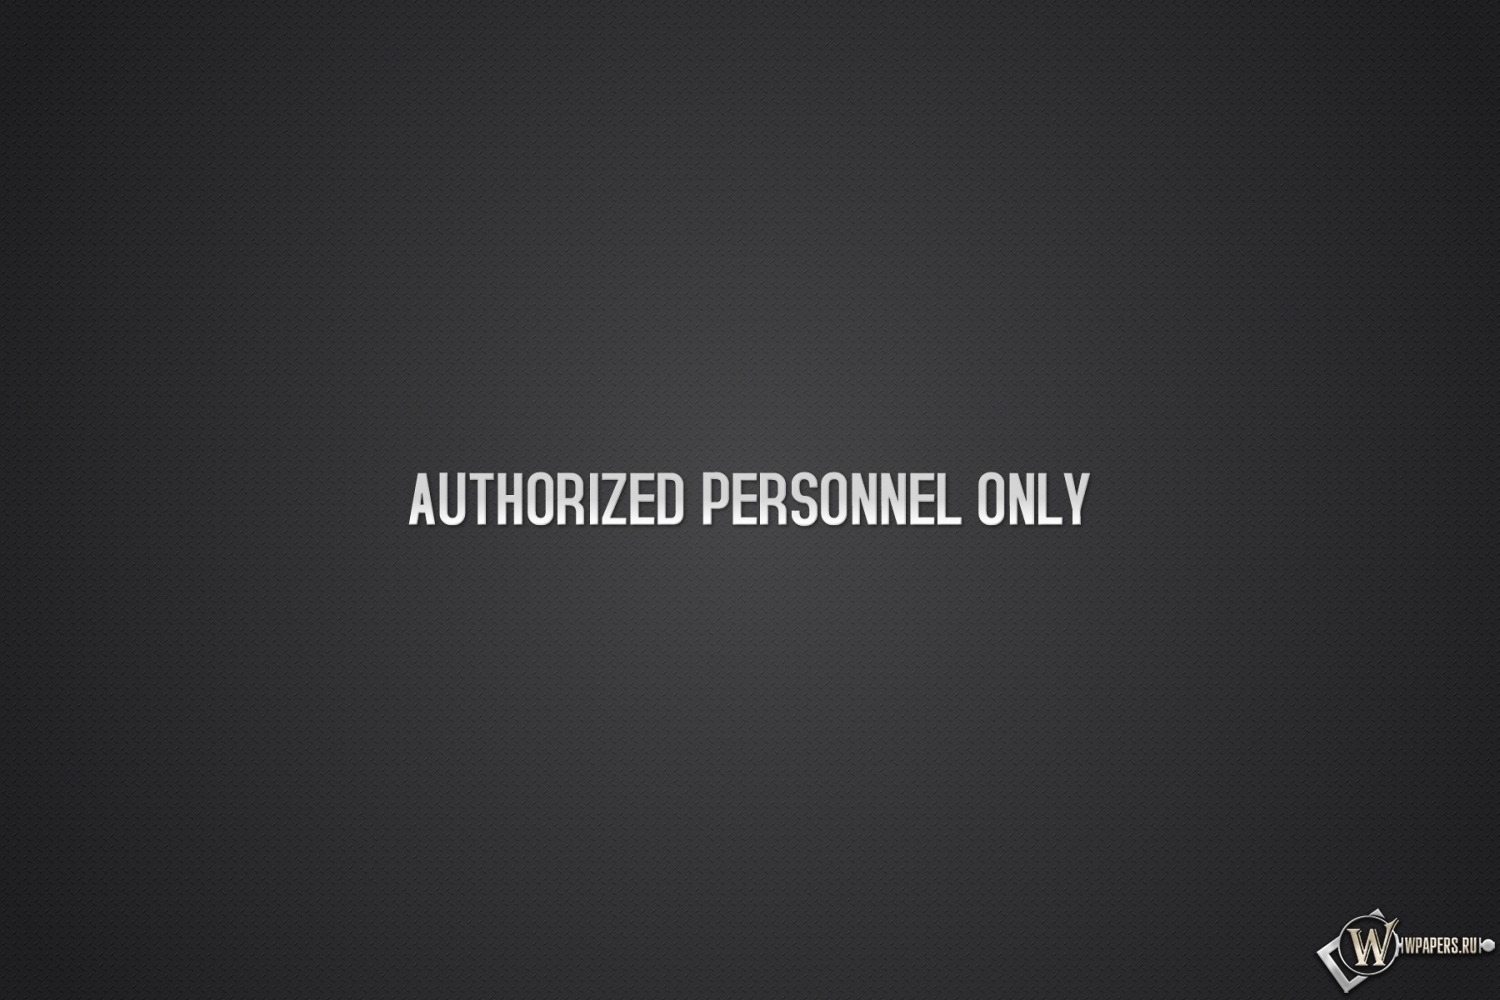 Authorized personnel only 1500x1000